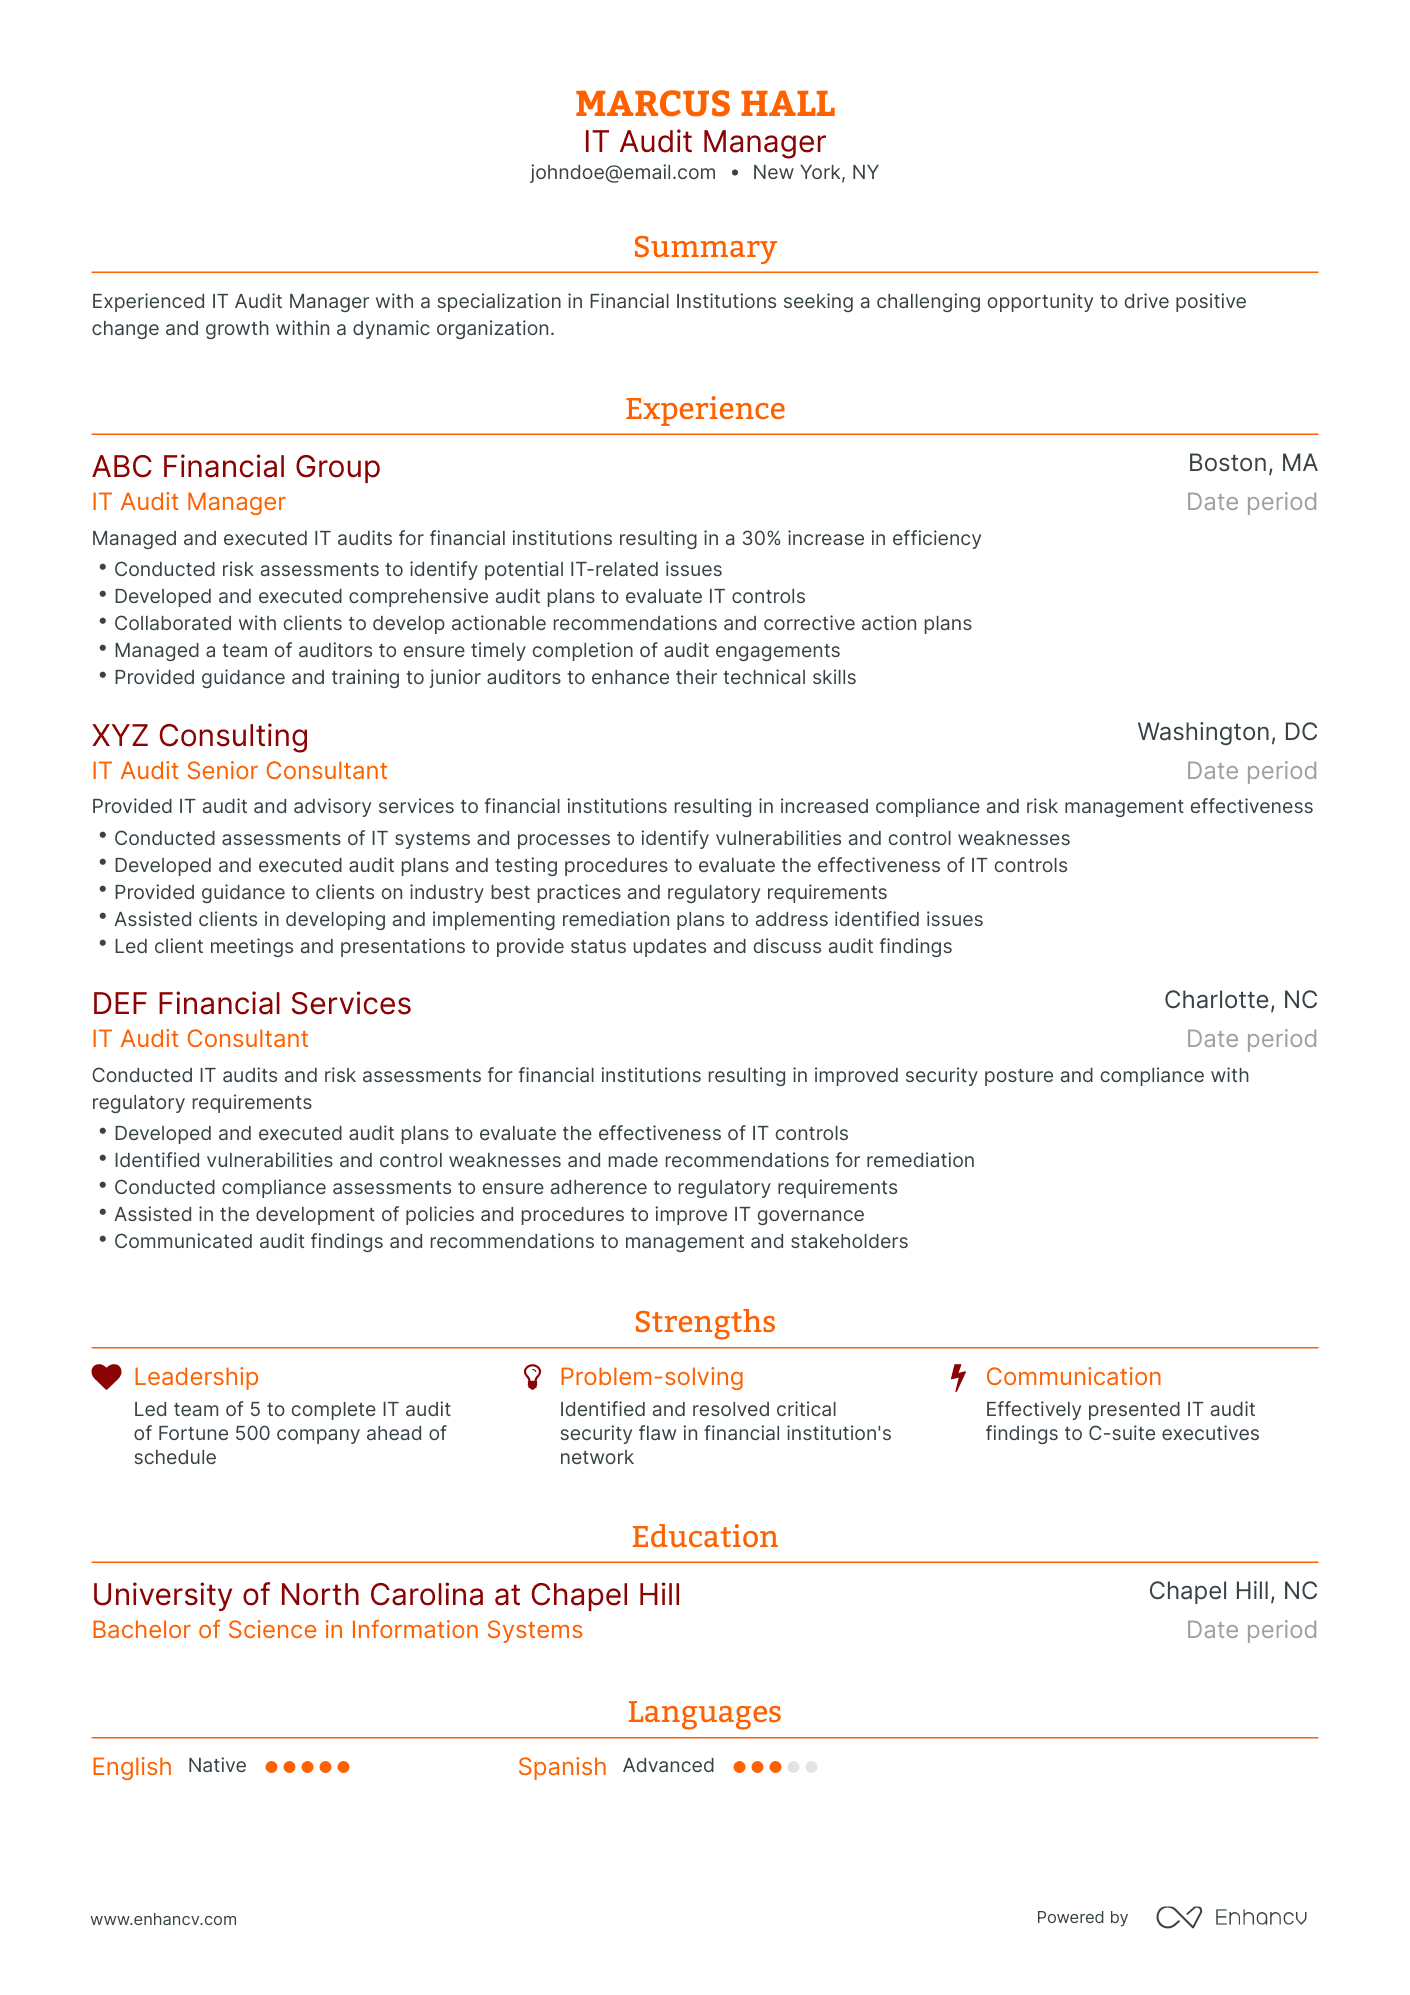 Traditional IT Audit Manager Resume Template